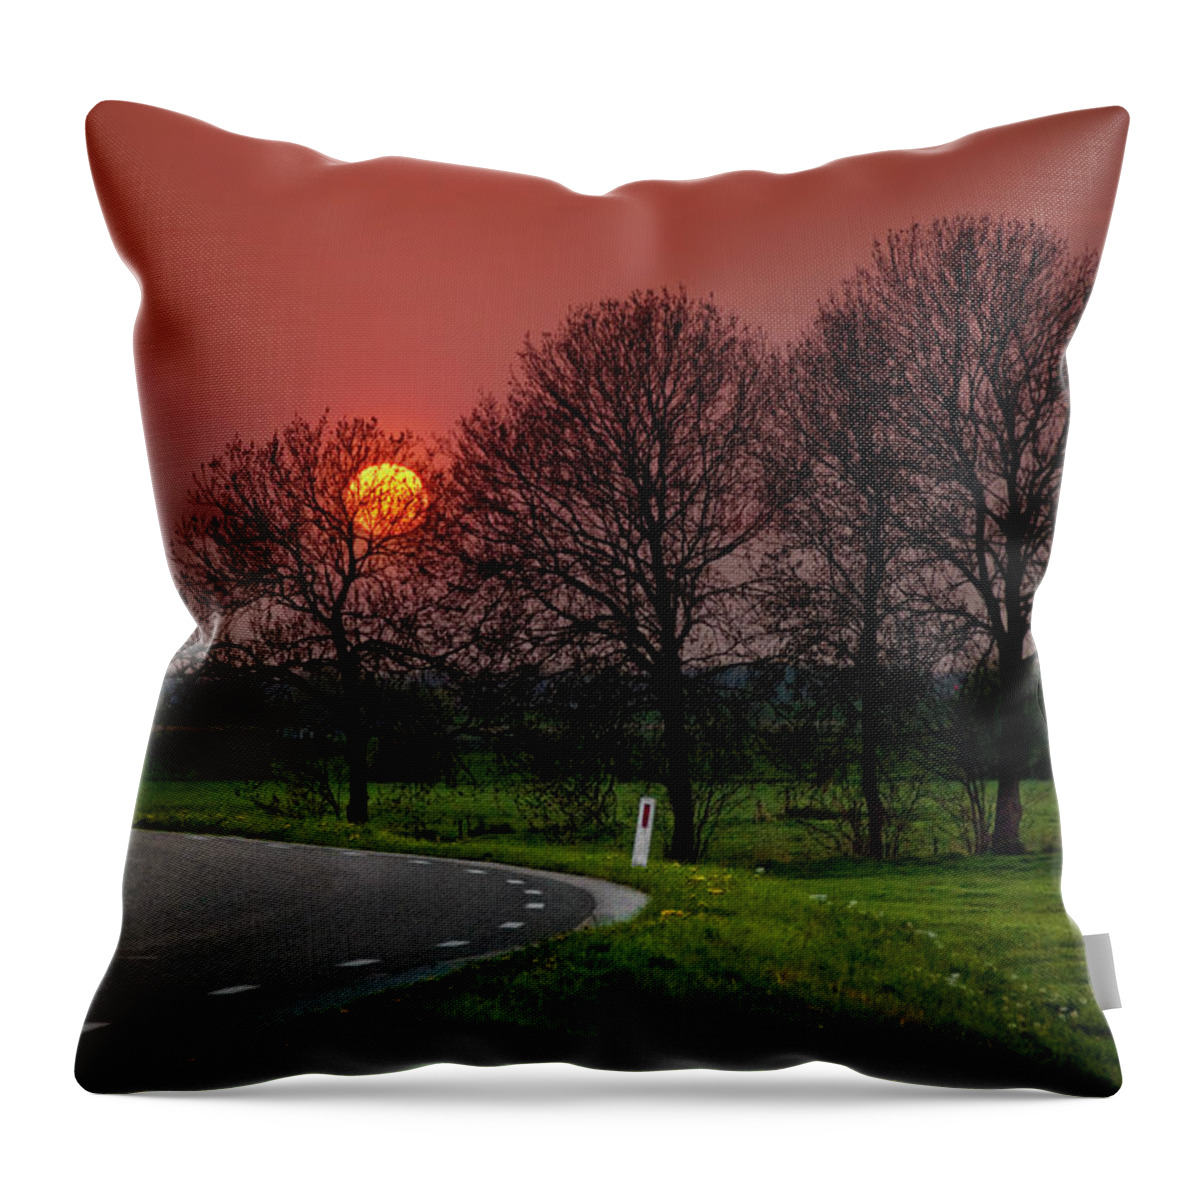 Scenics Throw Pillow featuring the photograph Sunset Over Dutch Countryside by Tjarko Evenboer / The Netherlands